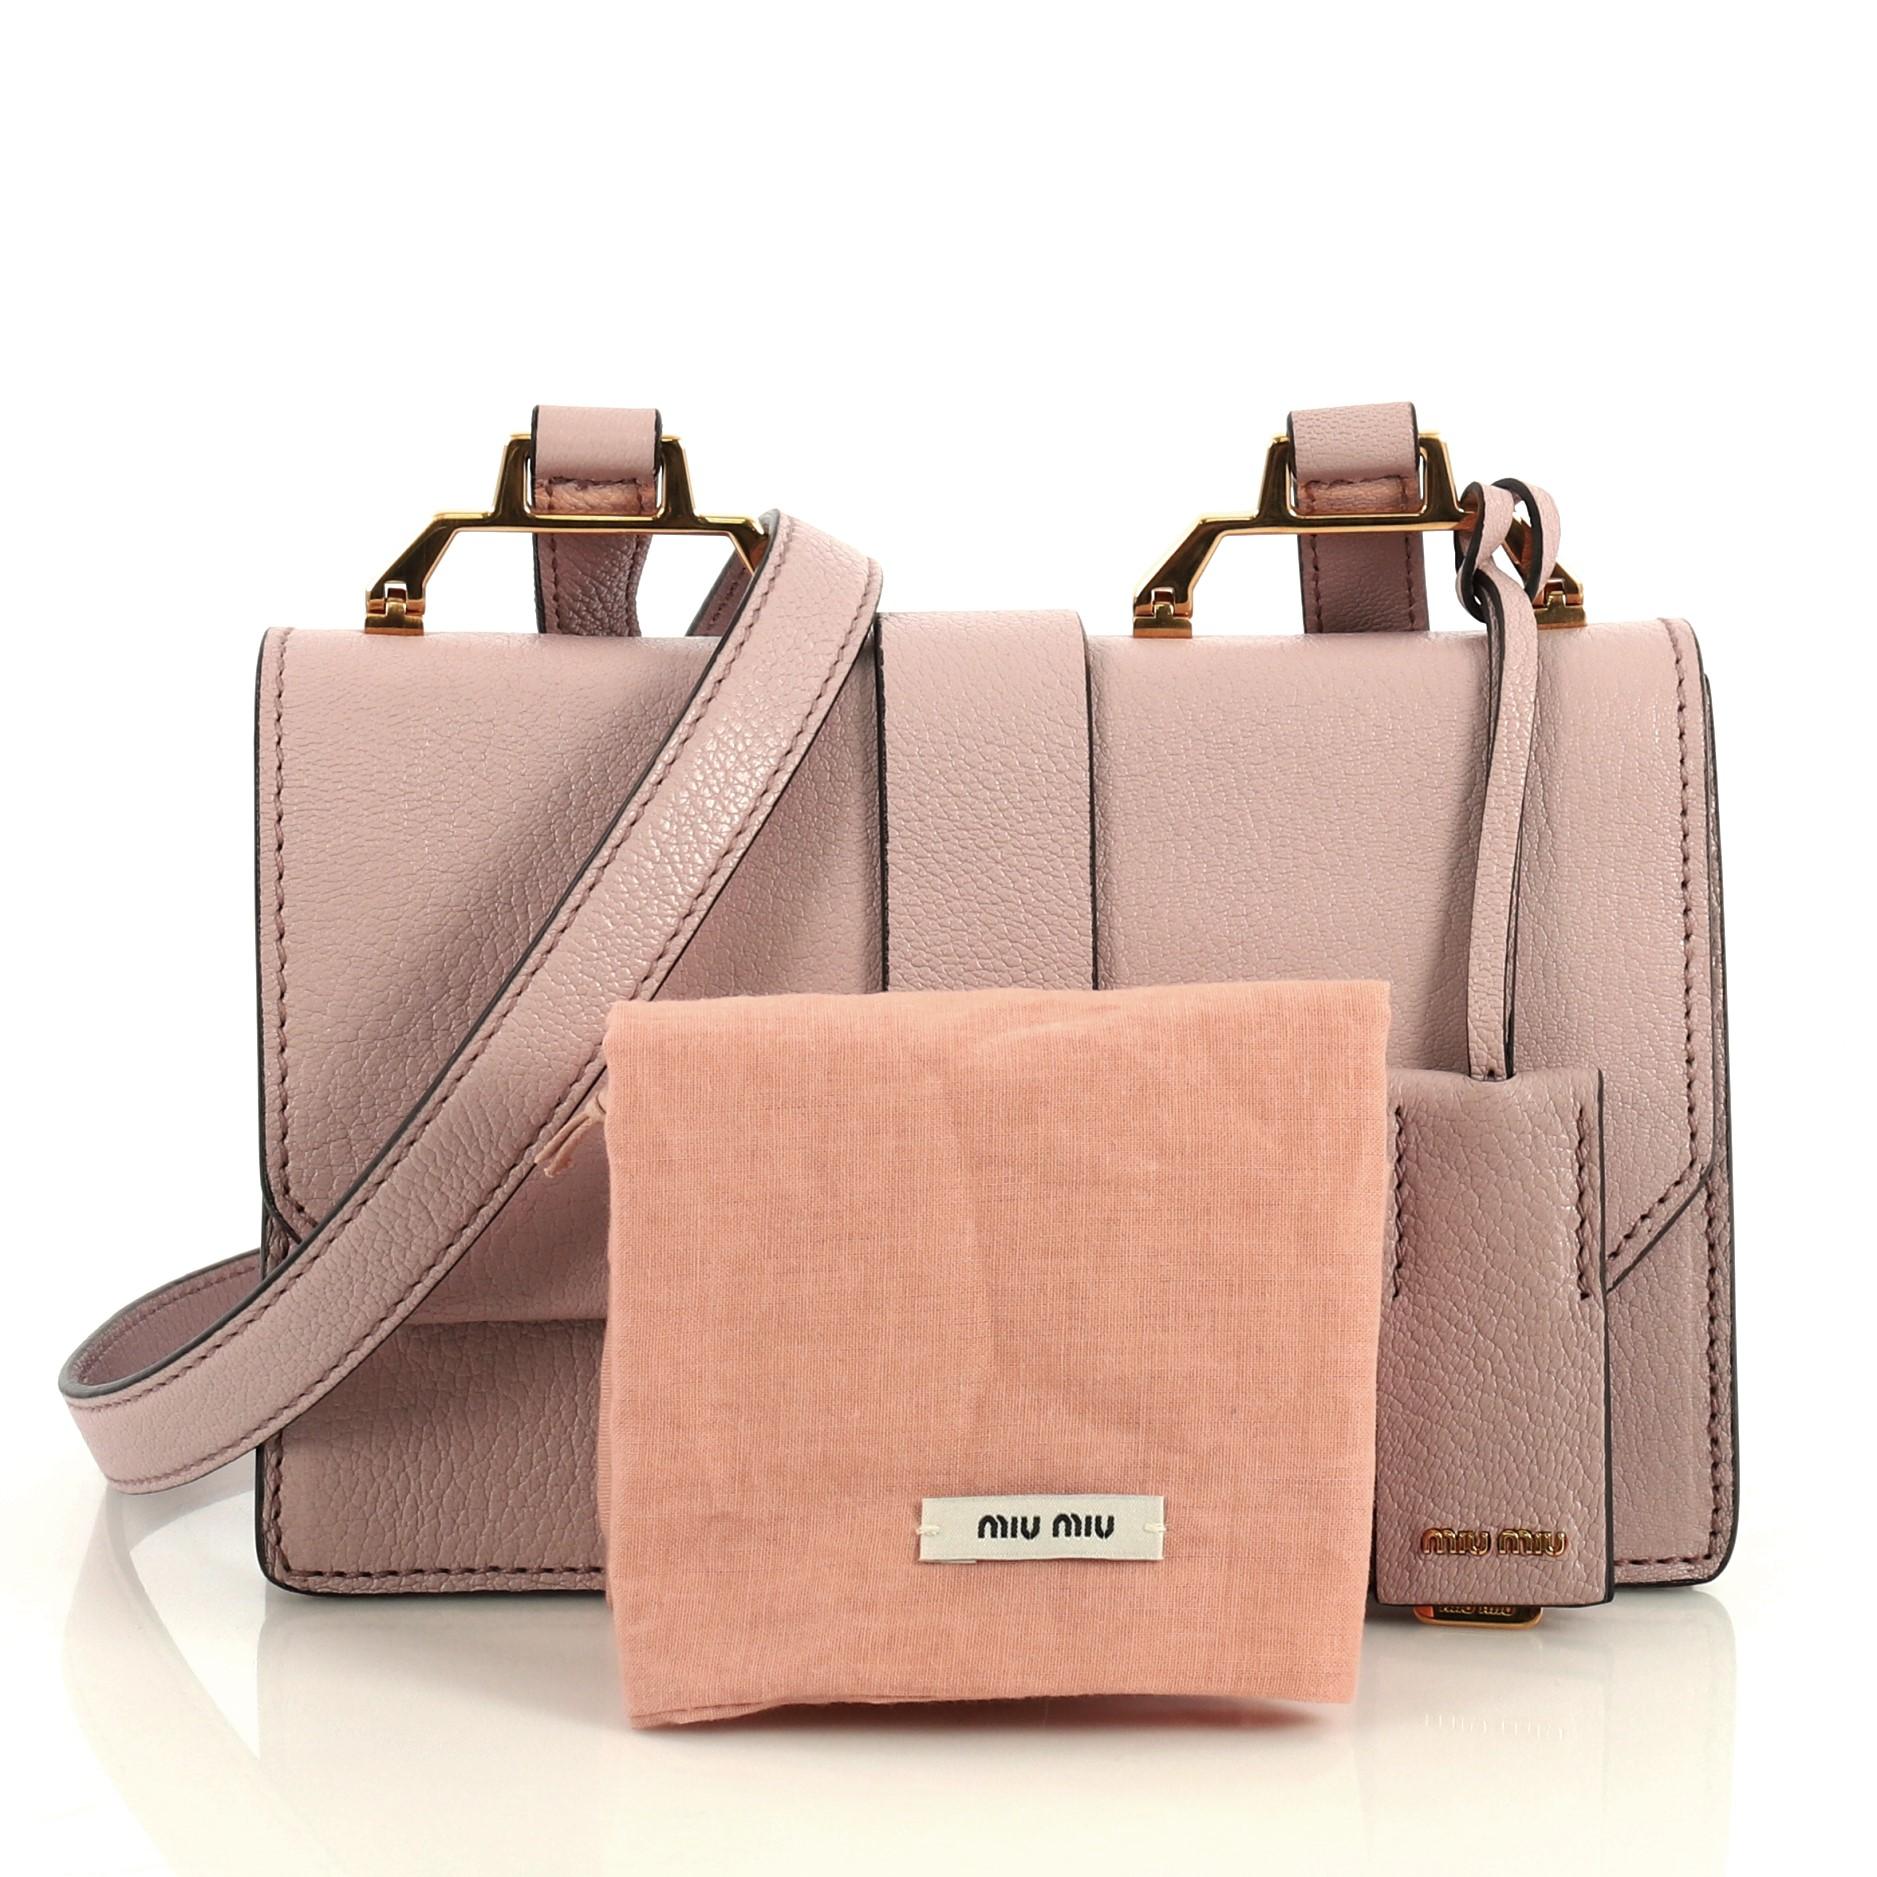 This Miu Miu Bicolor Madras Shoulder Bag Leather Small, crafted from pink leather, features an adjustable shoulder strap, exterior zip pocket and gold-tone hardware. Its push-lock closure opens to a pink suede interior with two open compartments and